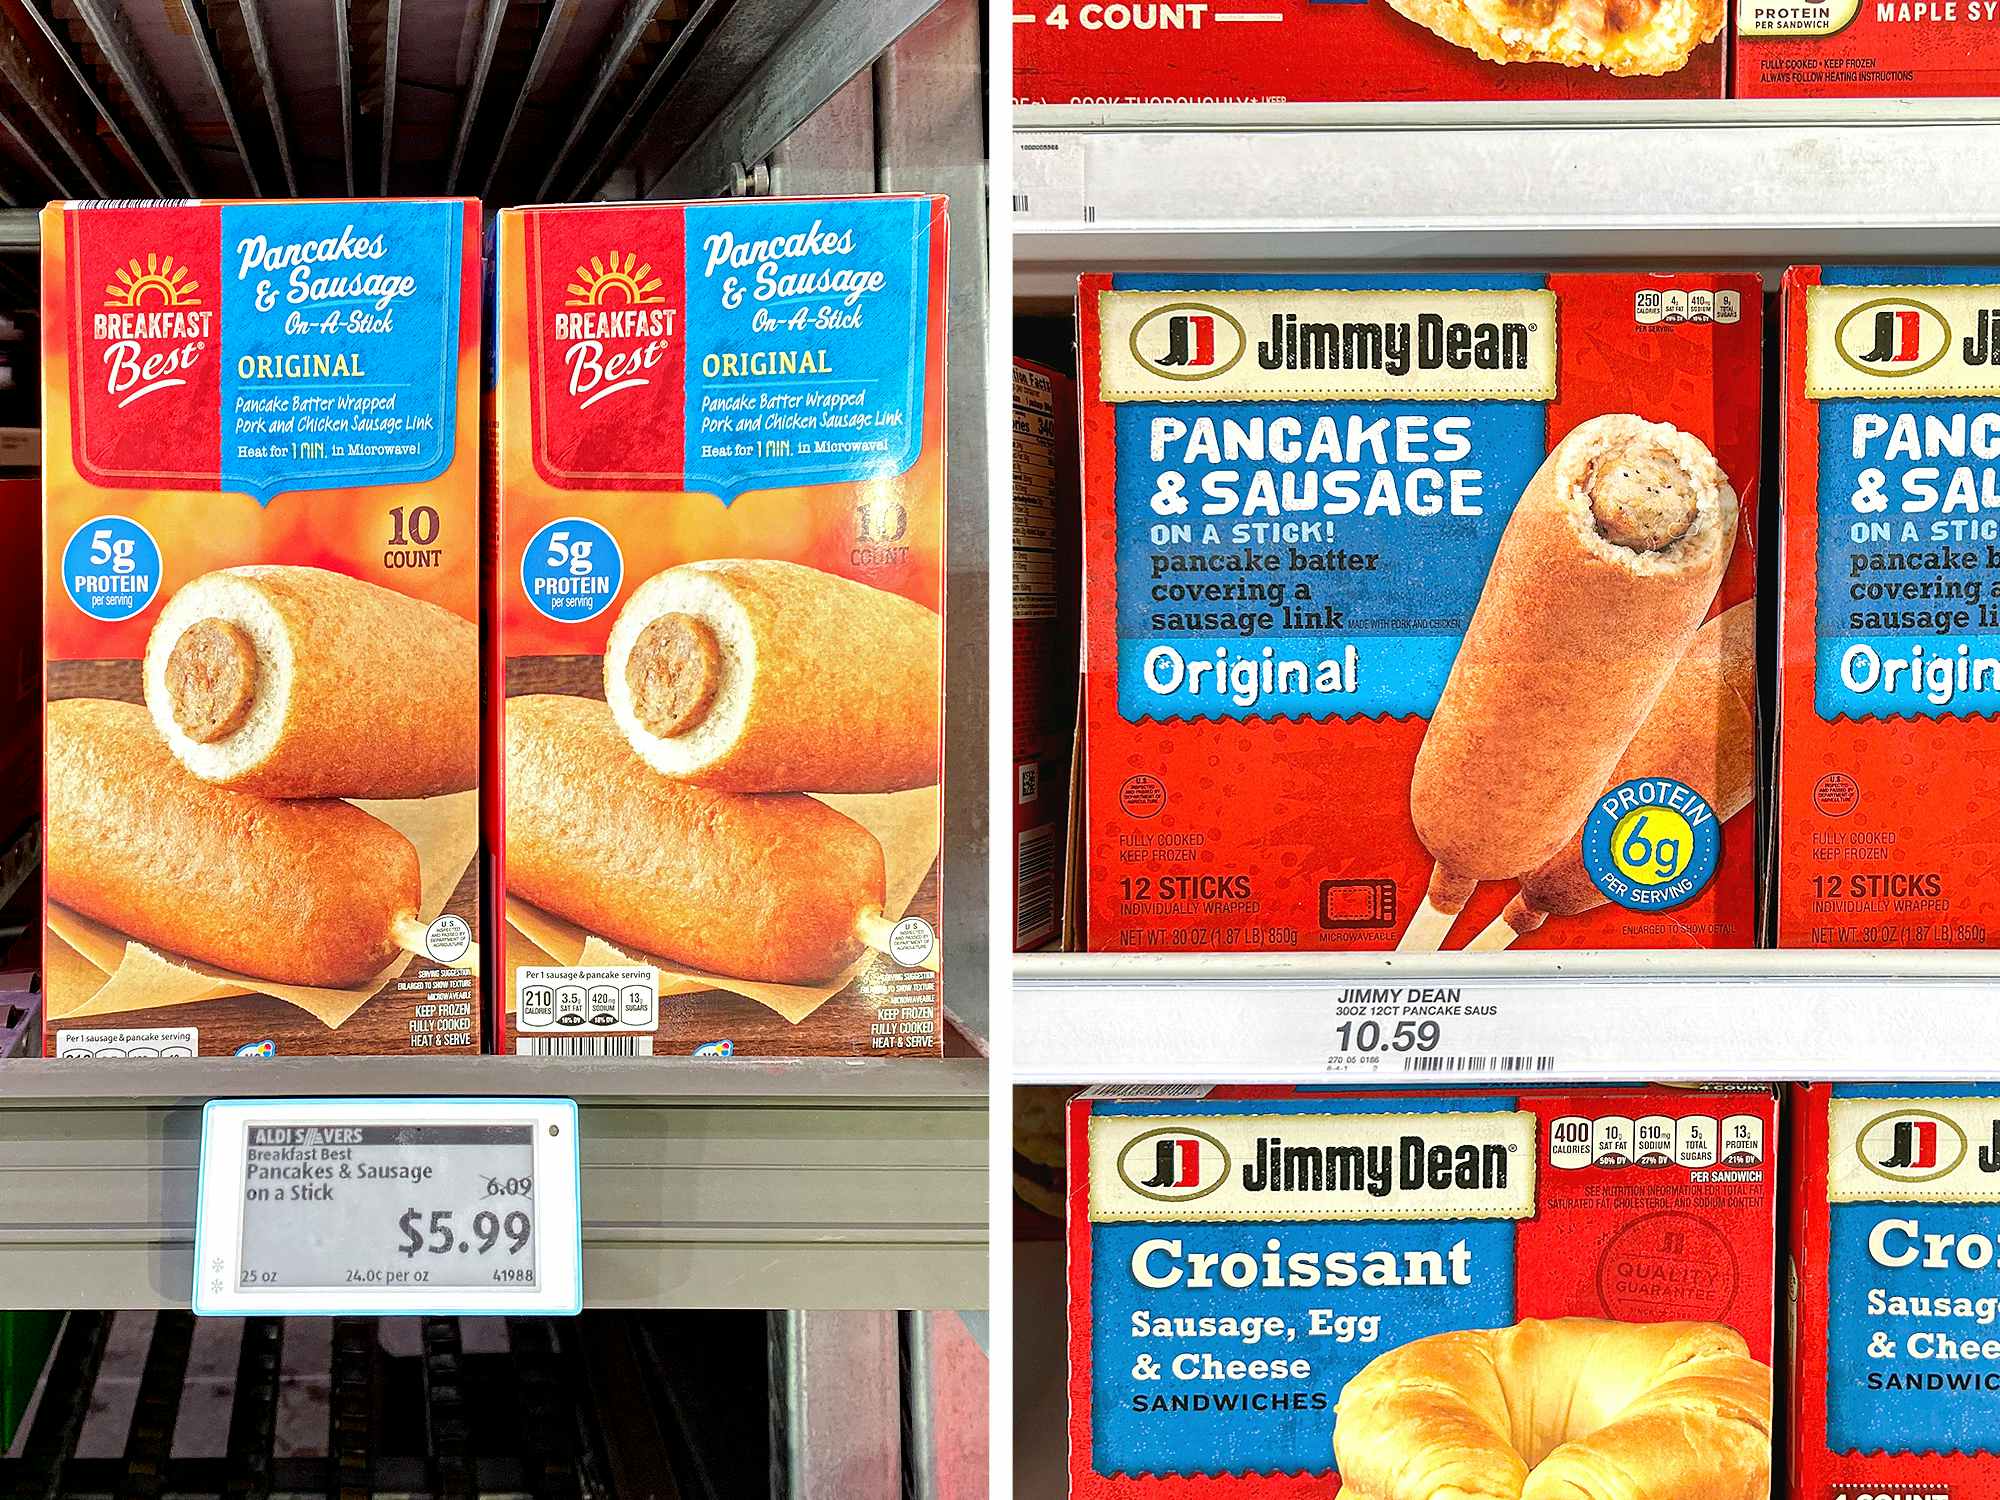 aldis breakfast best vs. jimmy dean pancakes and sausage on a stick price comparison